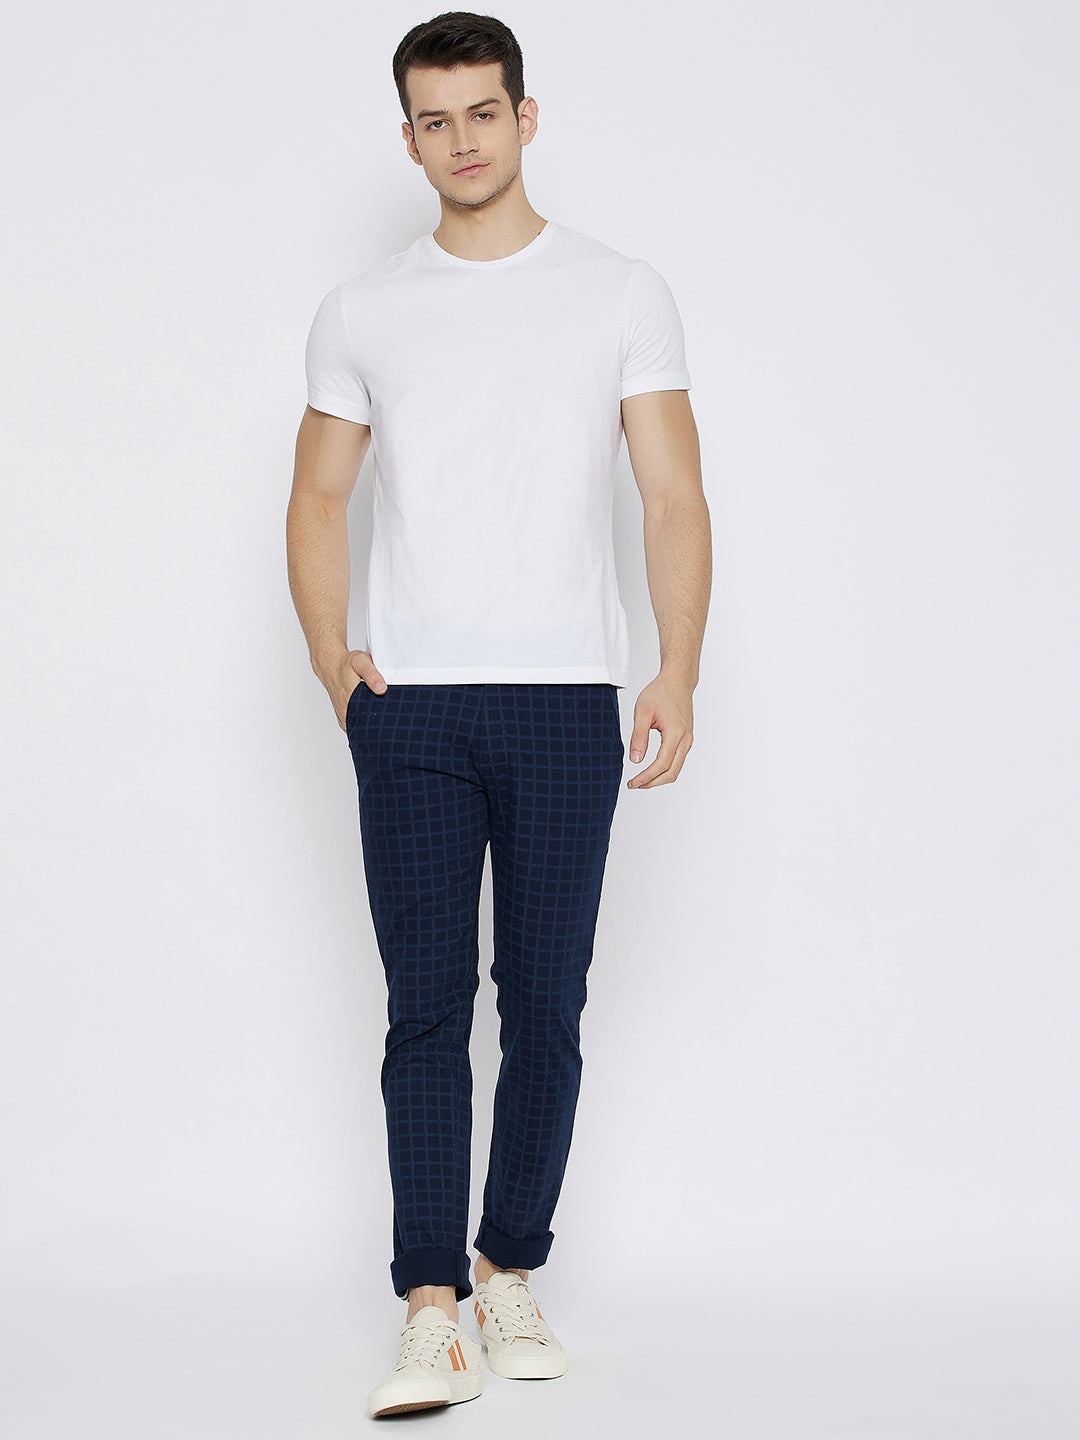 Blue Checked Slim Fit Trousers - Men Trousers